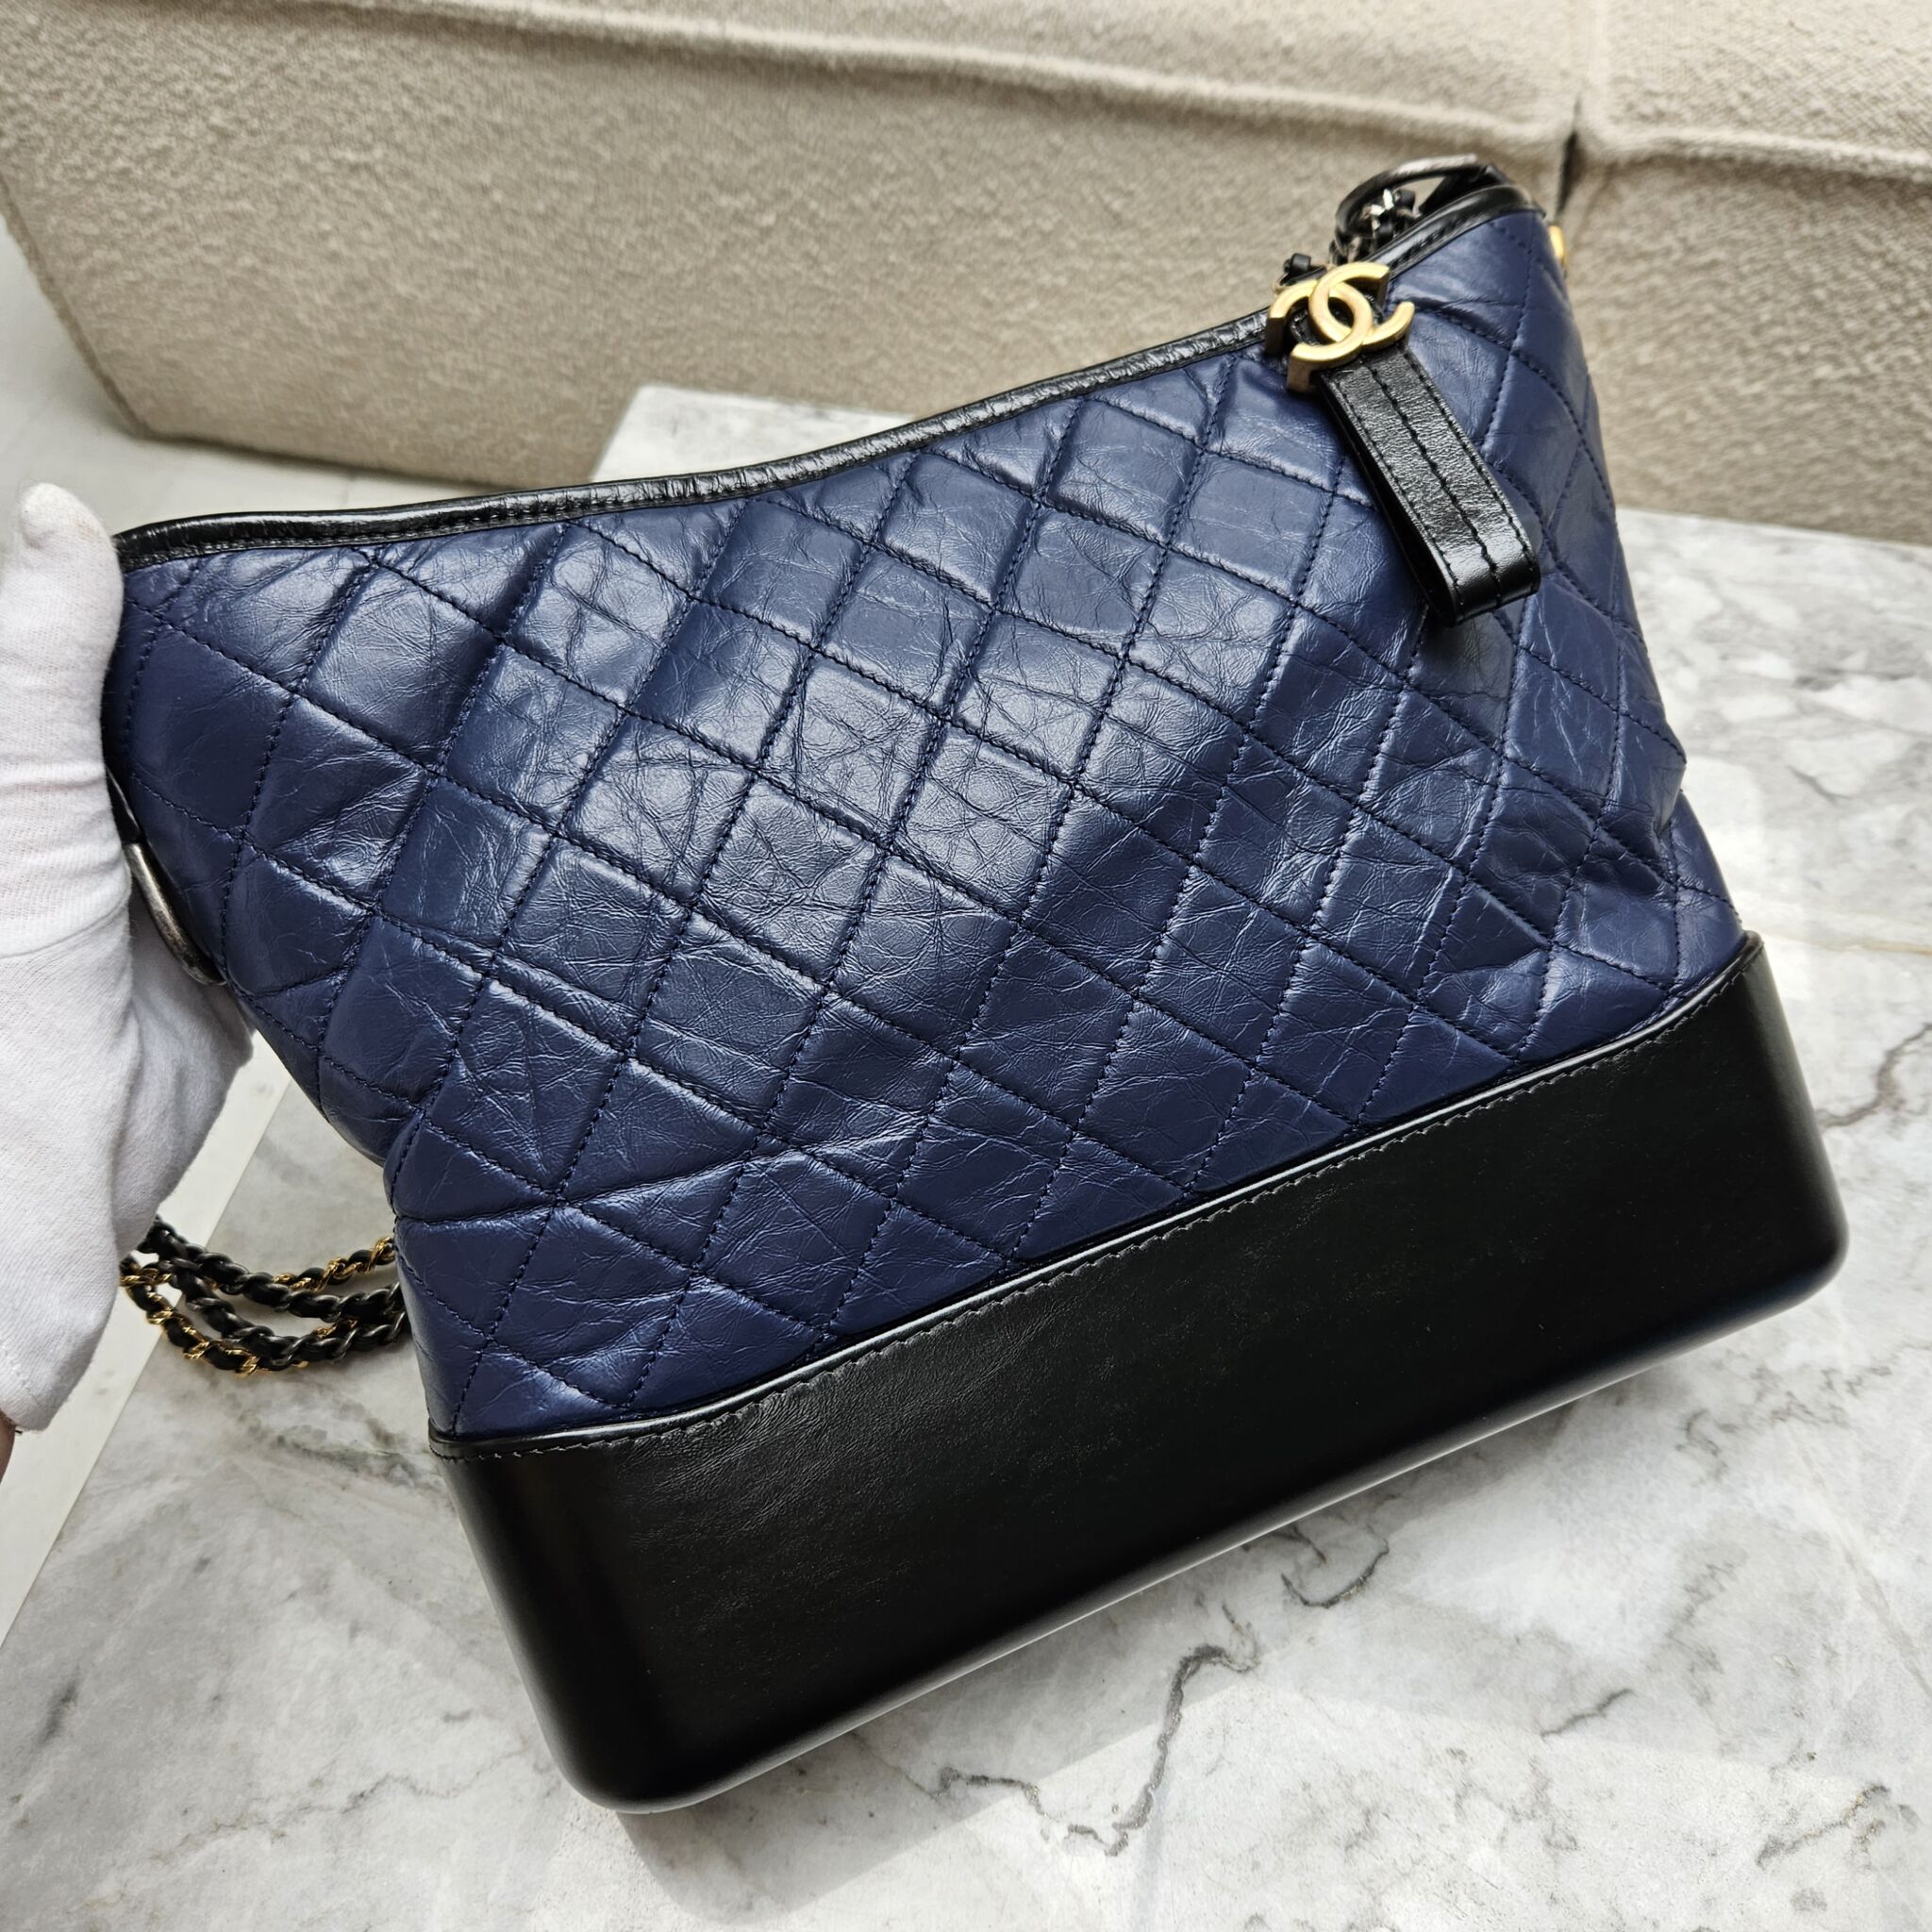 Chanel Large Gabrielle Hobo, Distressed leather, Blue/Black - Laulay Luxury